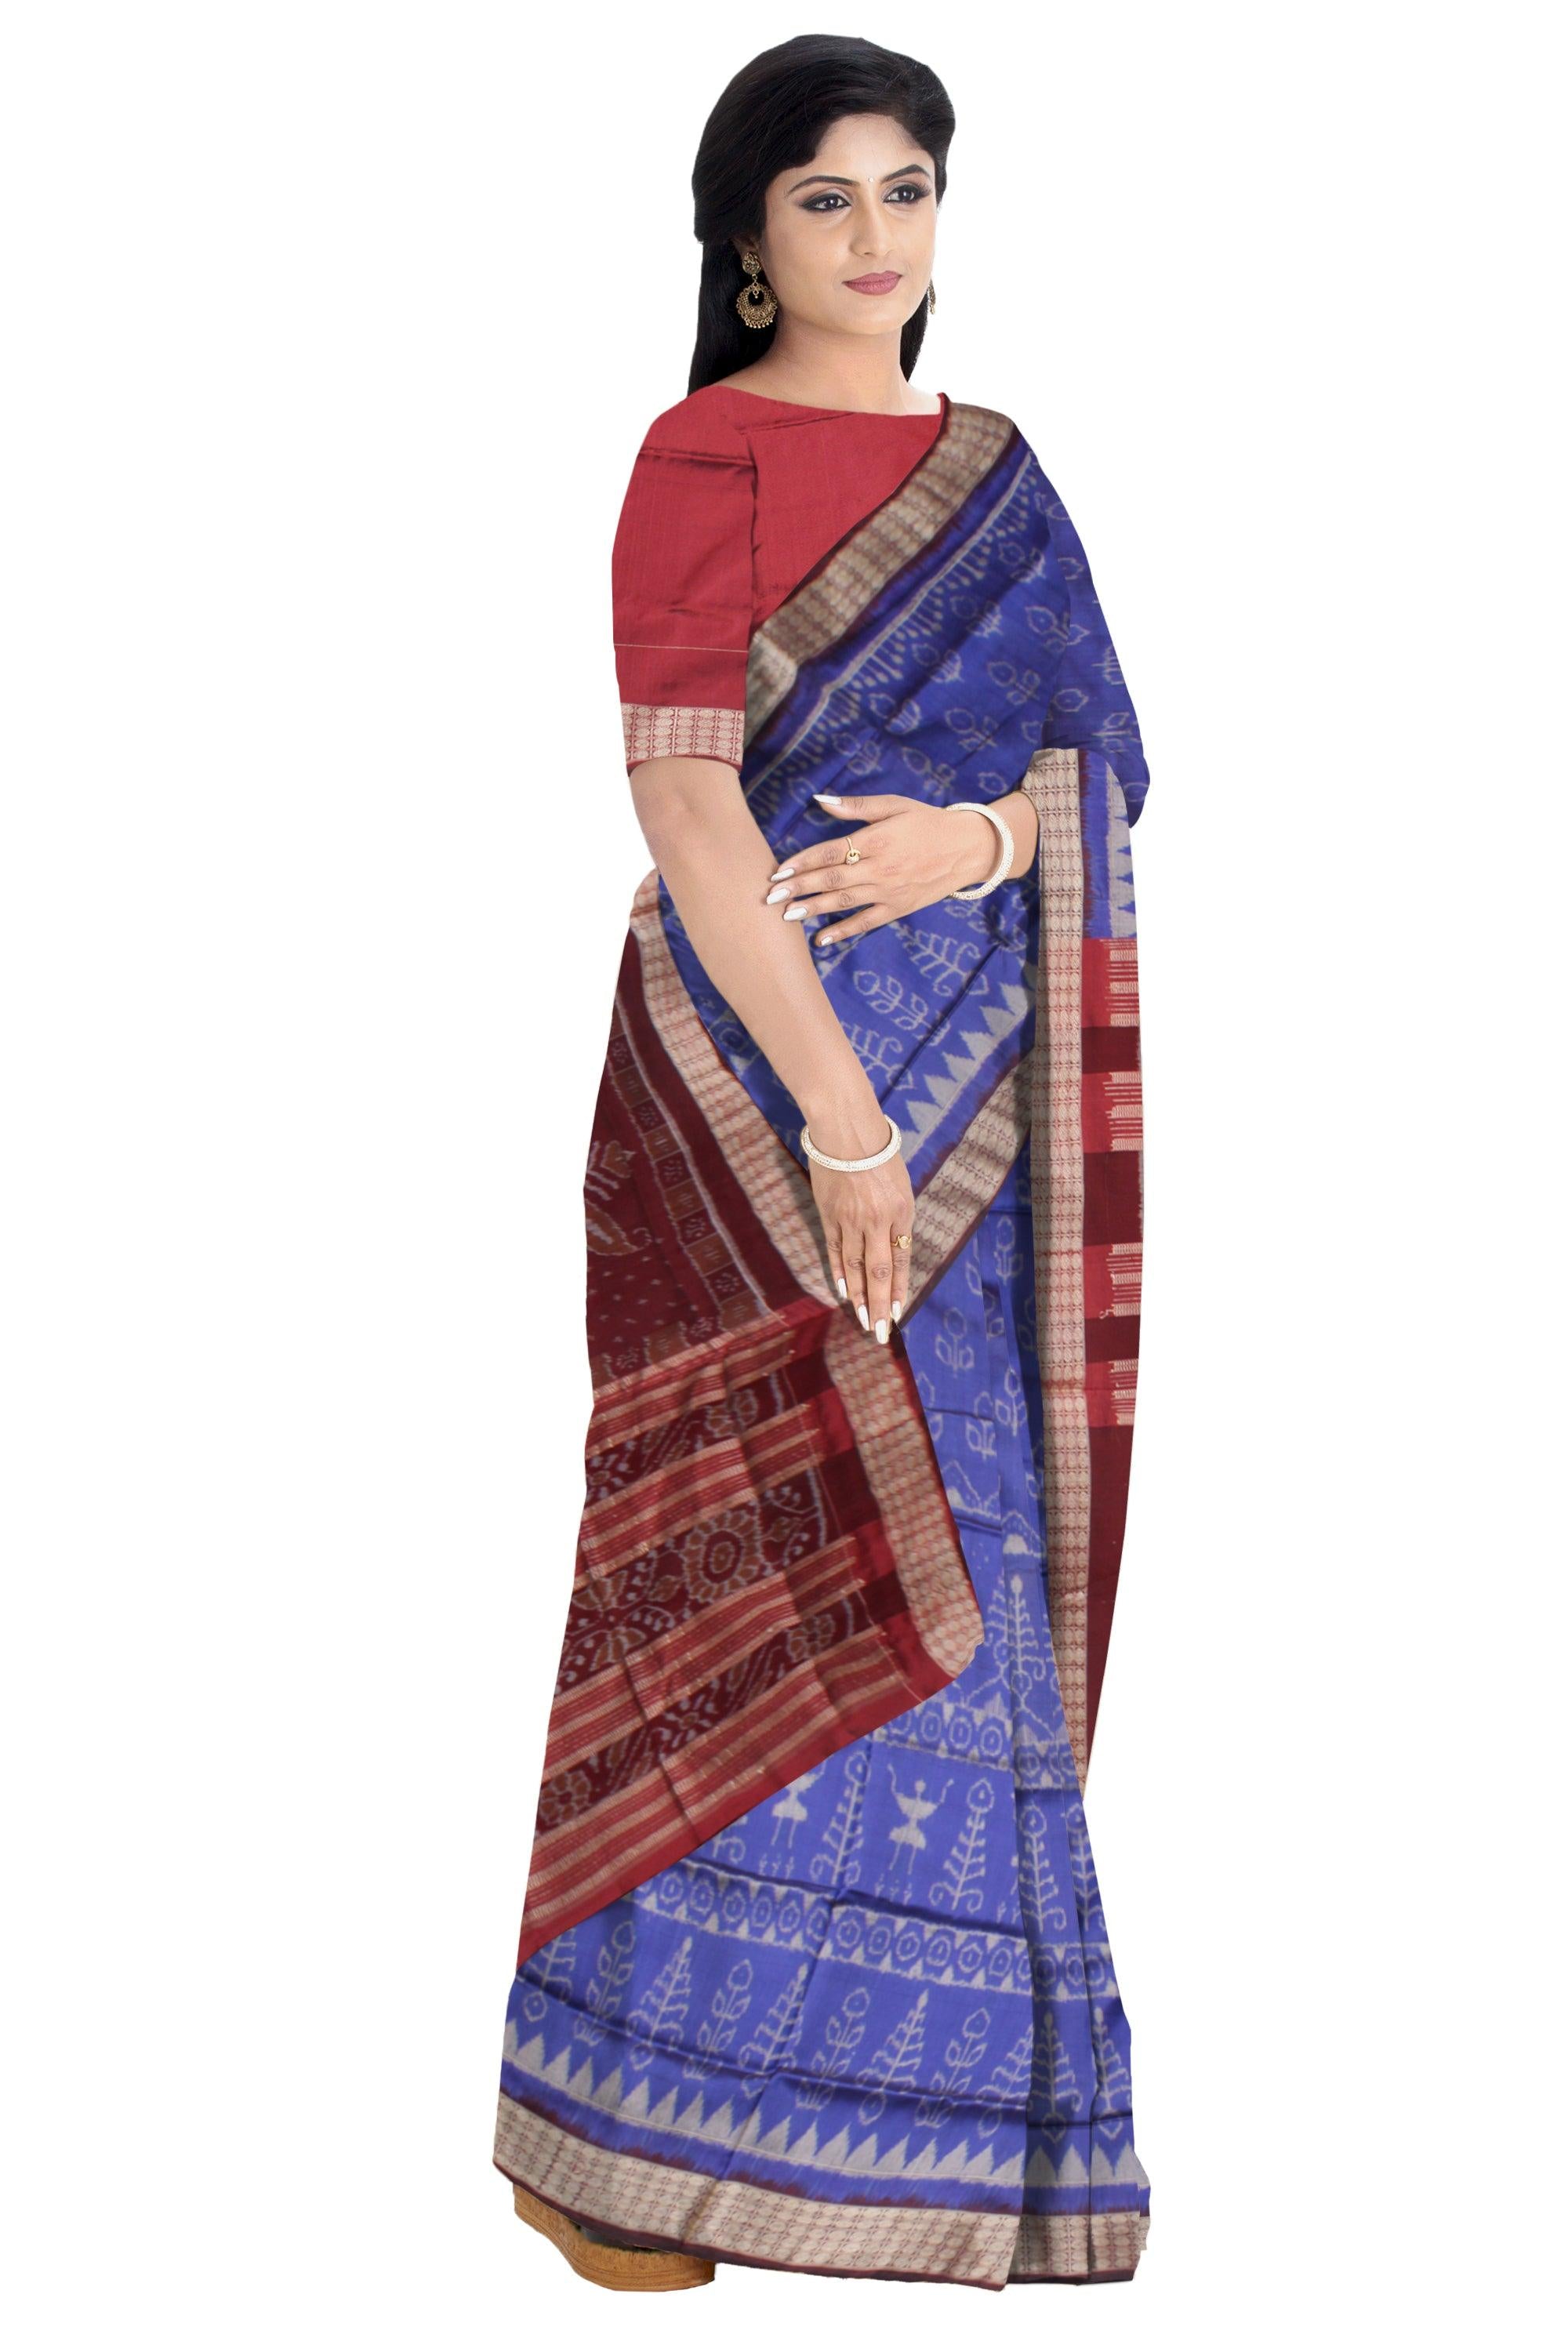 TRADITIONAL TERRACOTTA PATTERN PATA SAREE IS LIGHT PURPLE AND MAROON COLOR BASE, WITH BLOUSE PIECE. - Koshali Arts & Crafts Enterprise